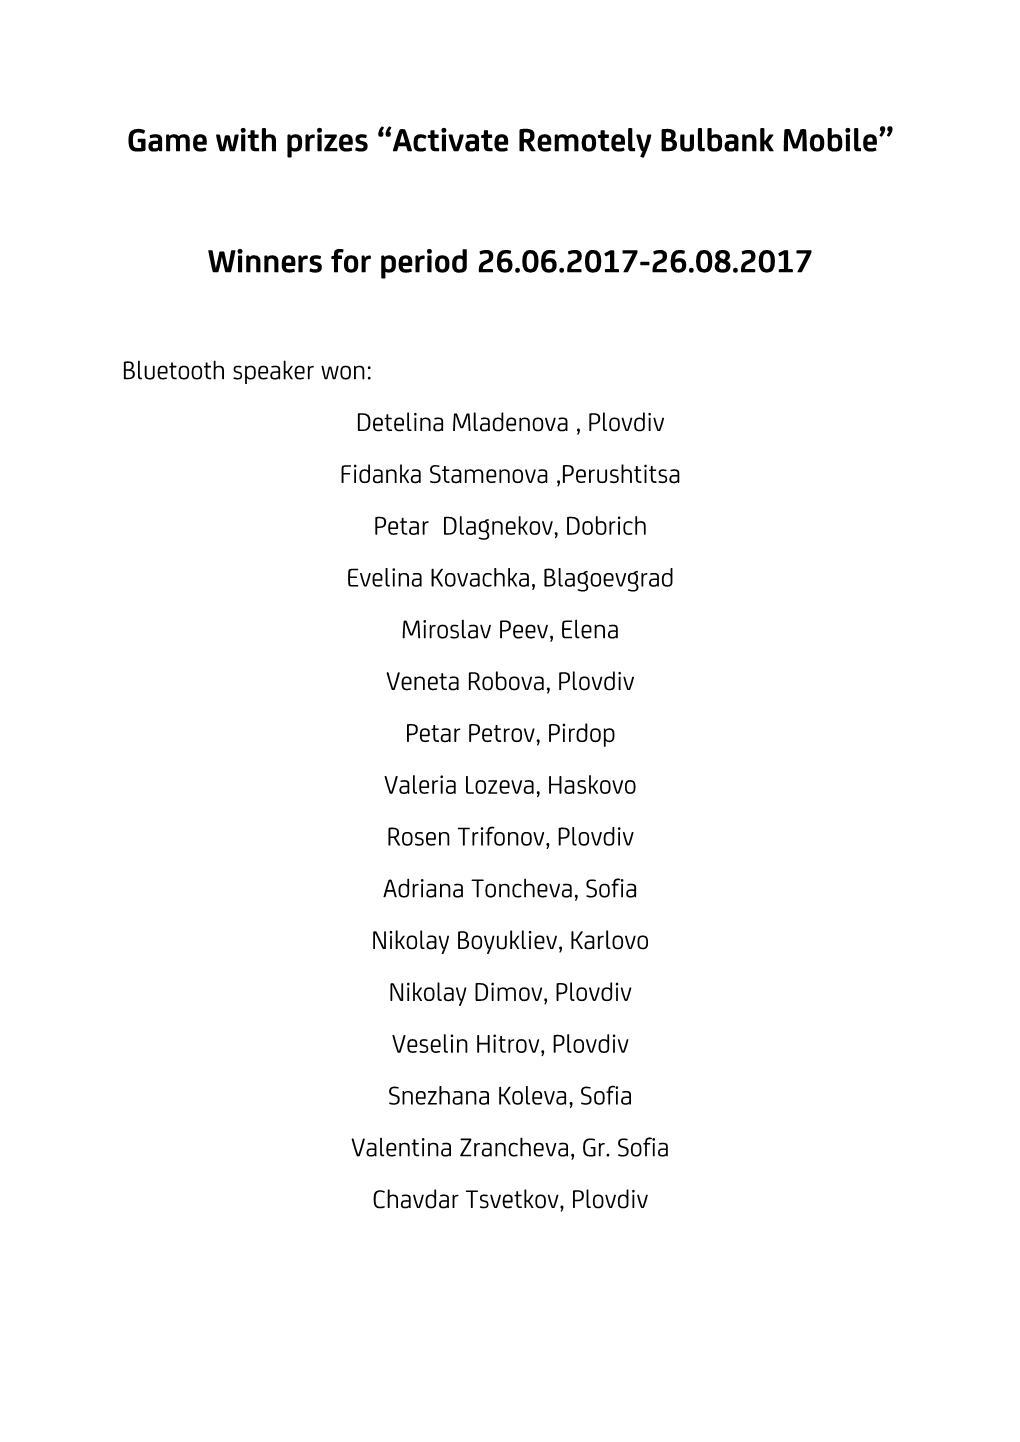 Game with Prizes “Activate Remotely Bulbank Mobile” Winners for Period 26.06.2017-26.08.2017